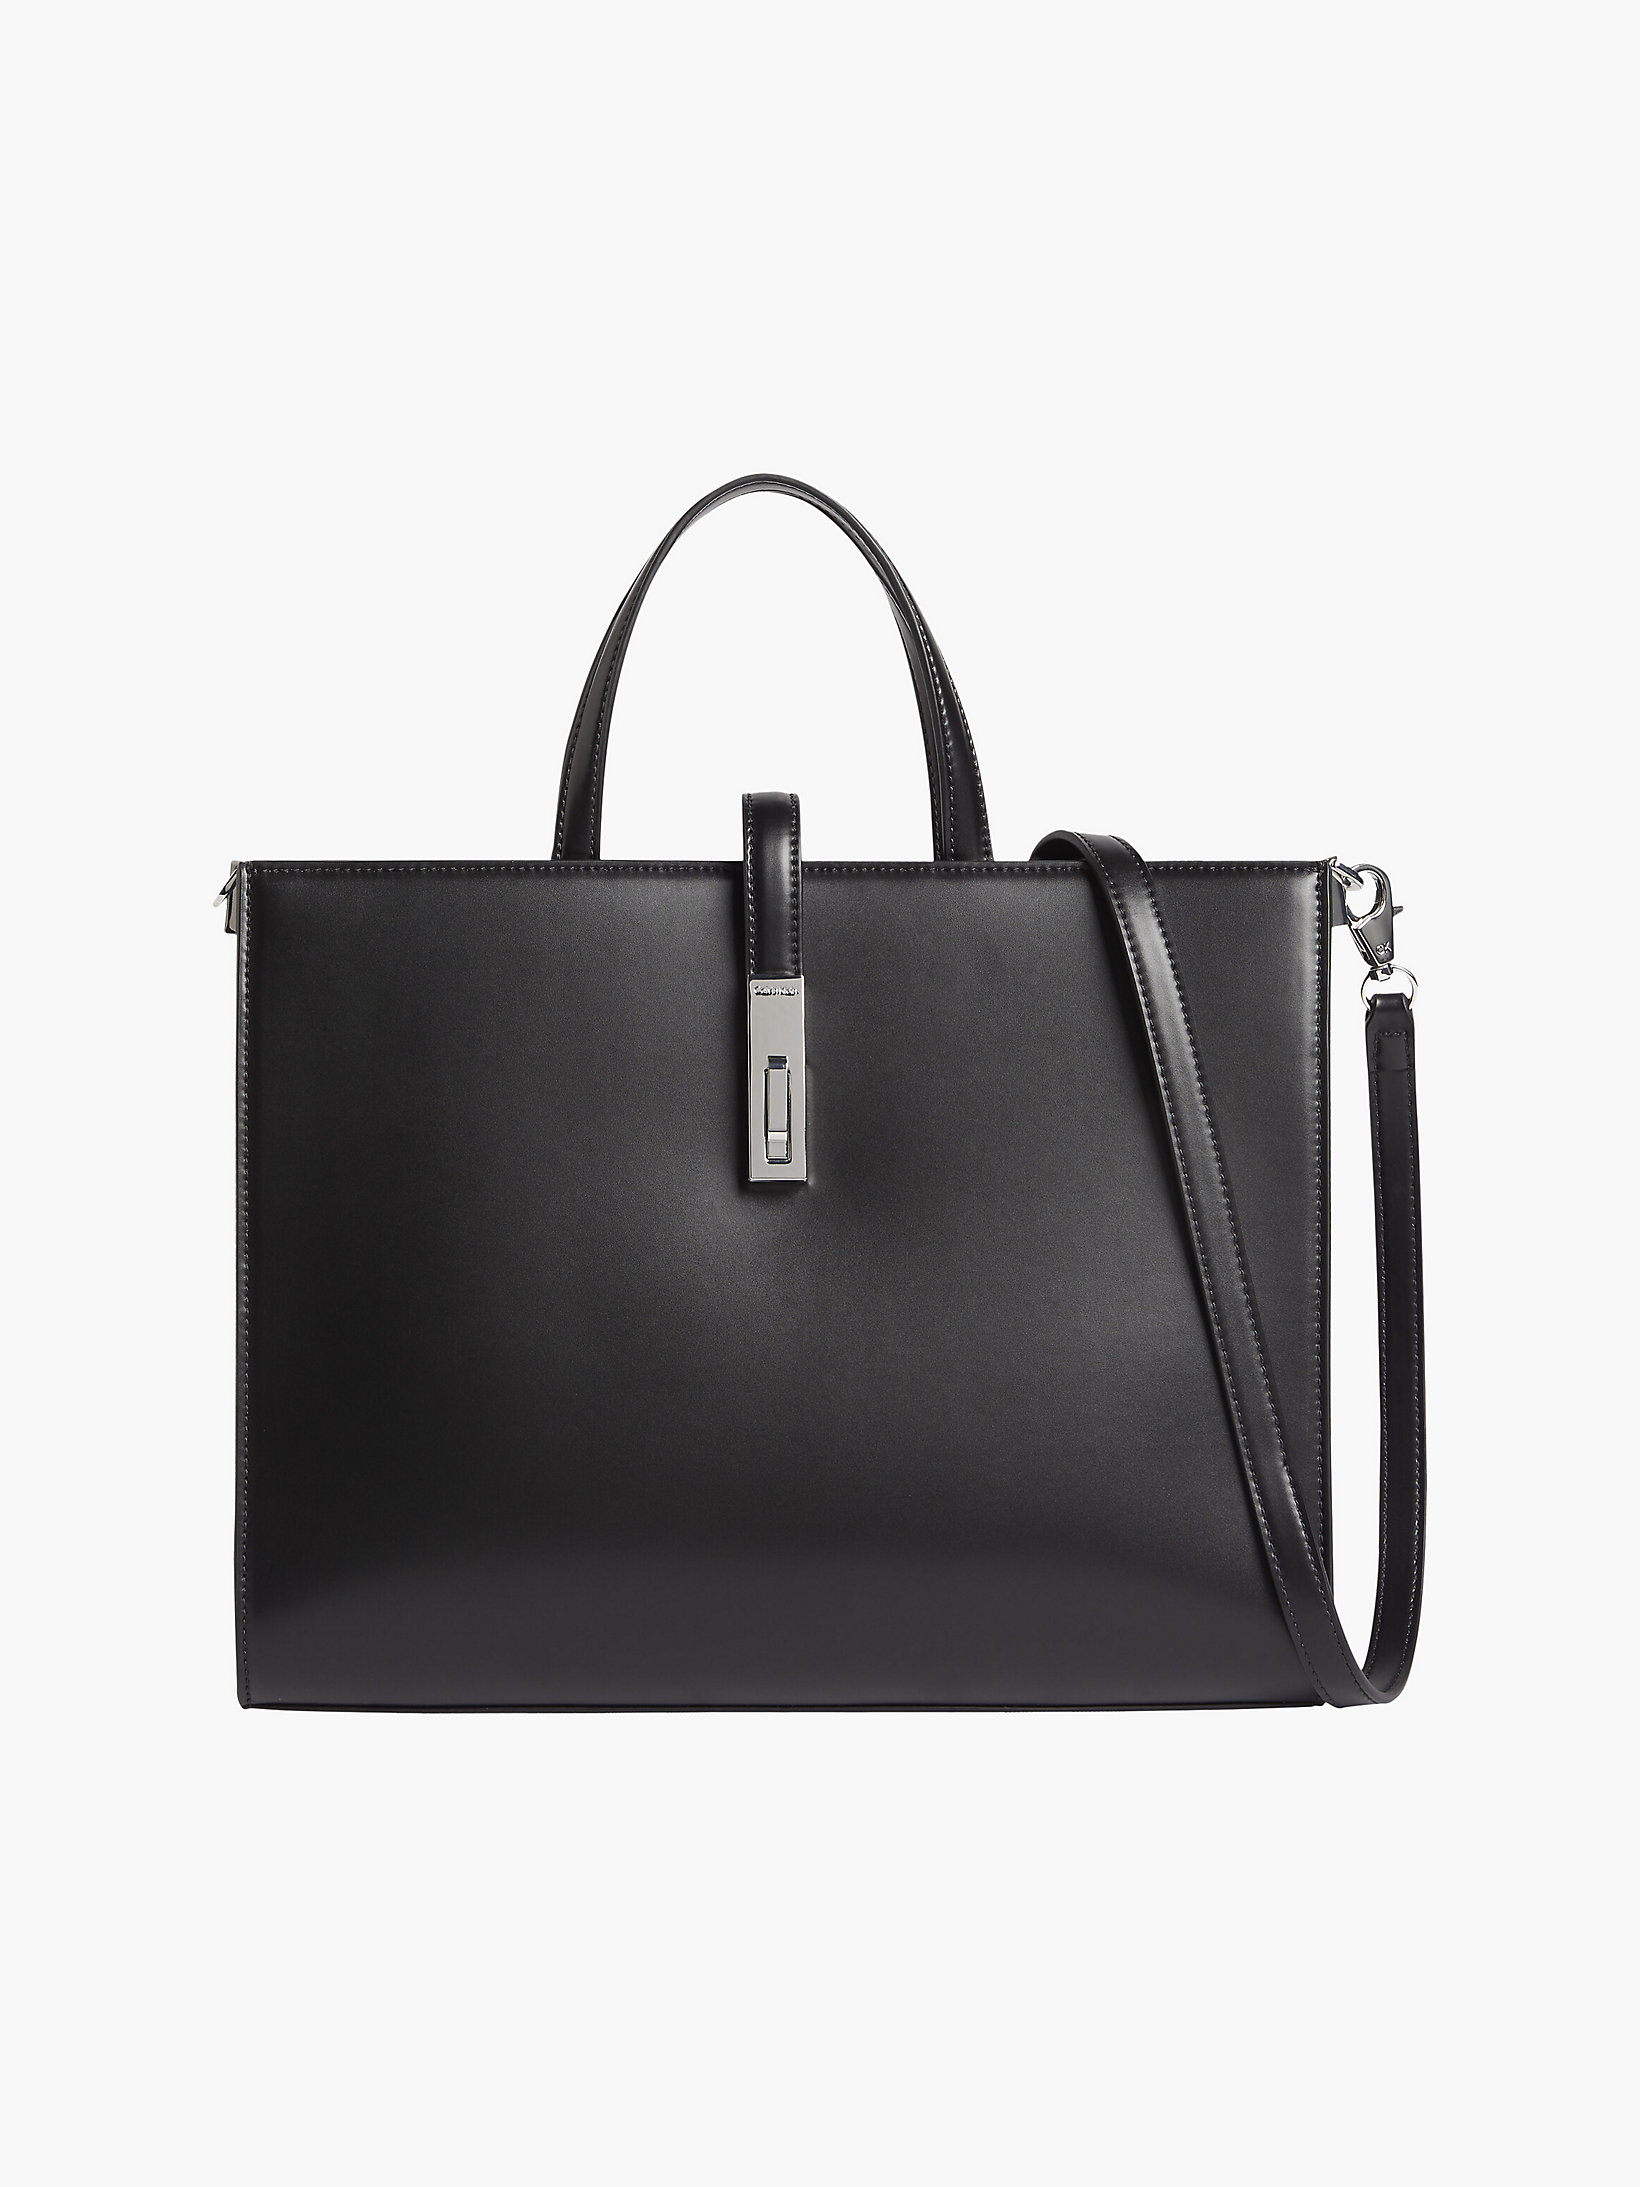 CK Black Recycled Tote Bag undefined women Calvin Klein